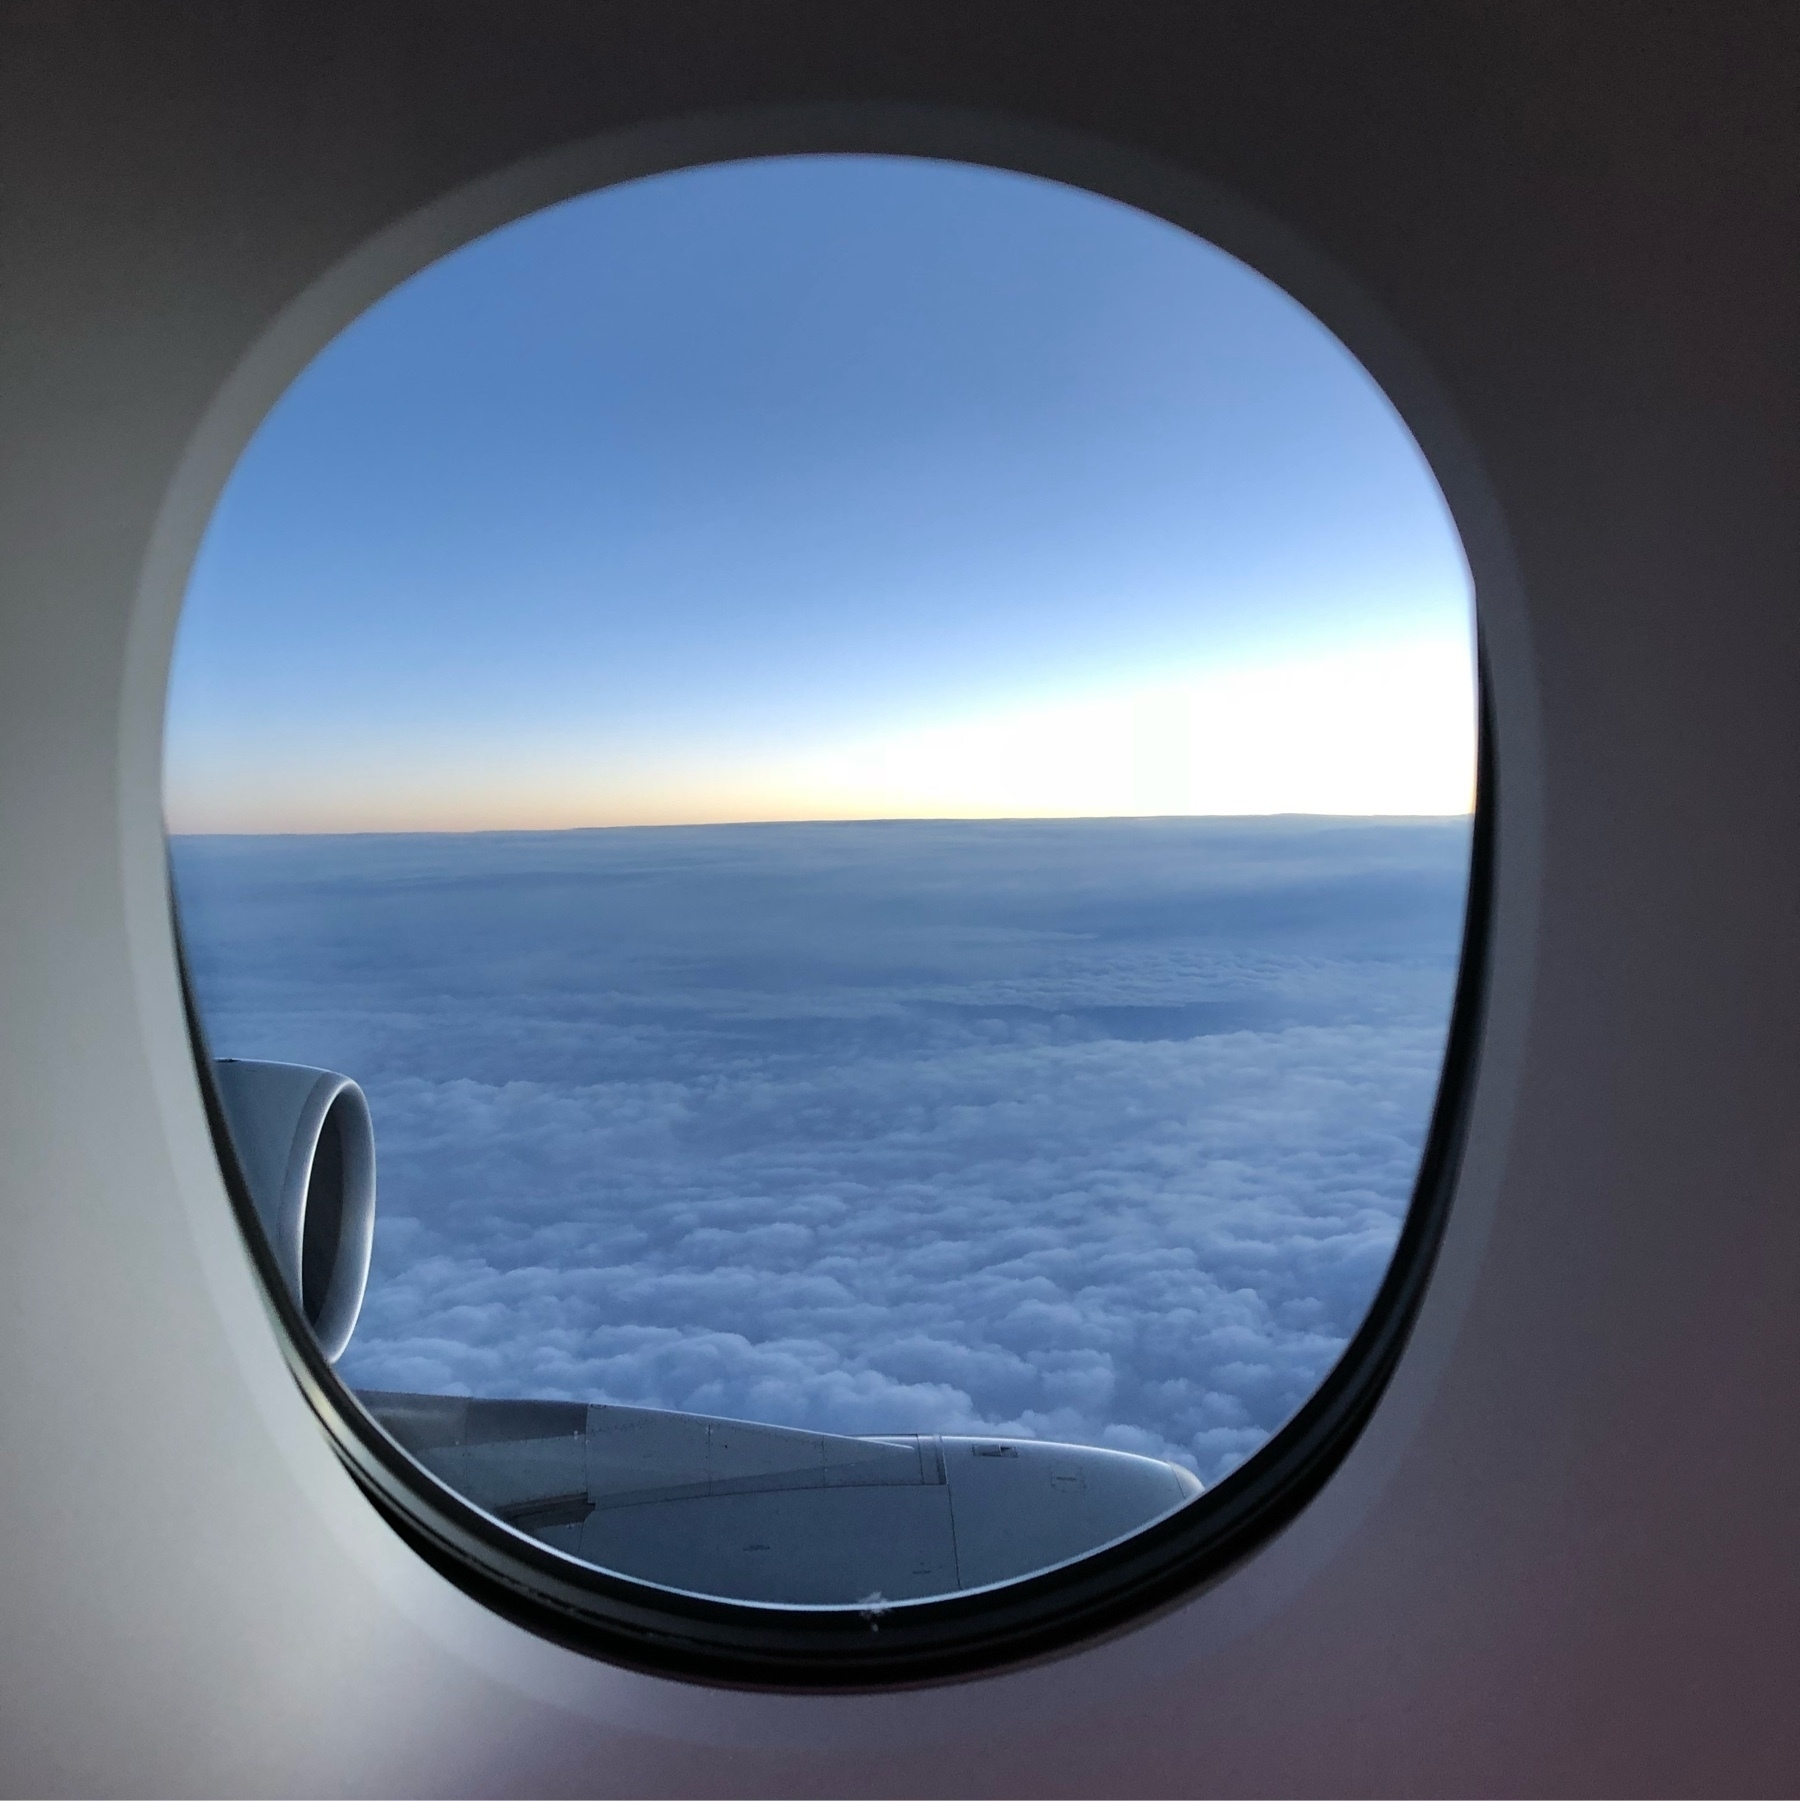 A view looking out of a plane window towards the horizon. A small part of the engine is visible to the left and bottom and the bottom half of the view are white clouds and the upper half blue sky with a bright stripe of sunlight separating the two.